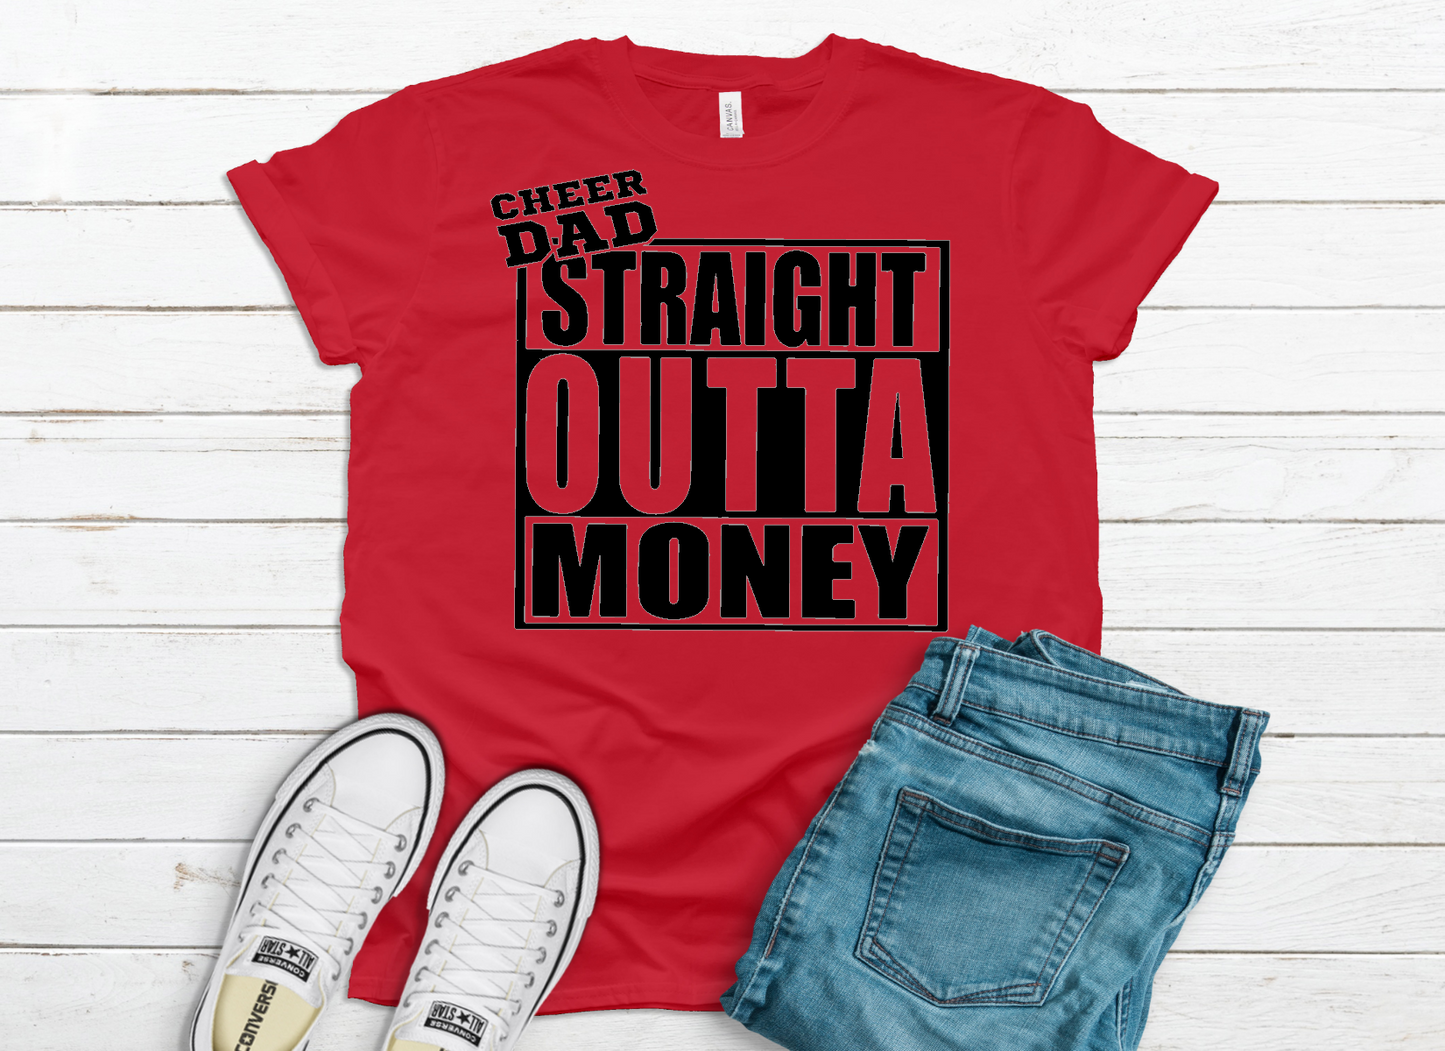 Cheer Dad straight outta money *Choose color from drop down menu*